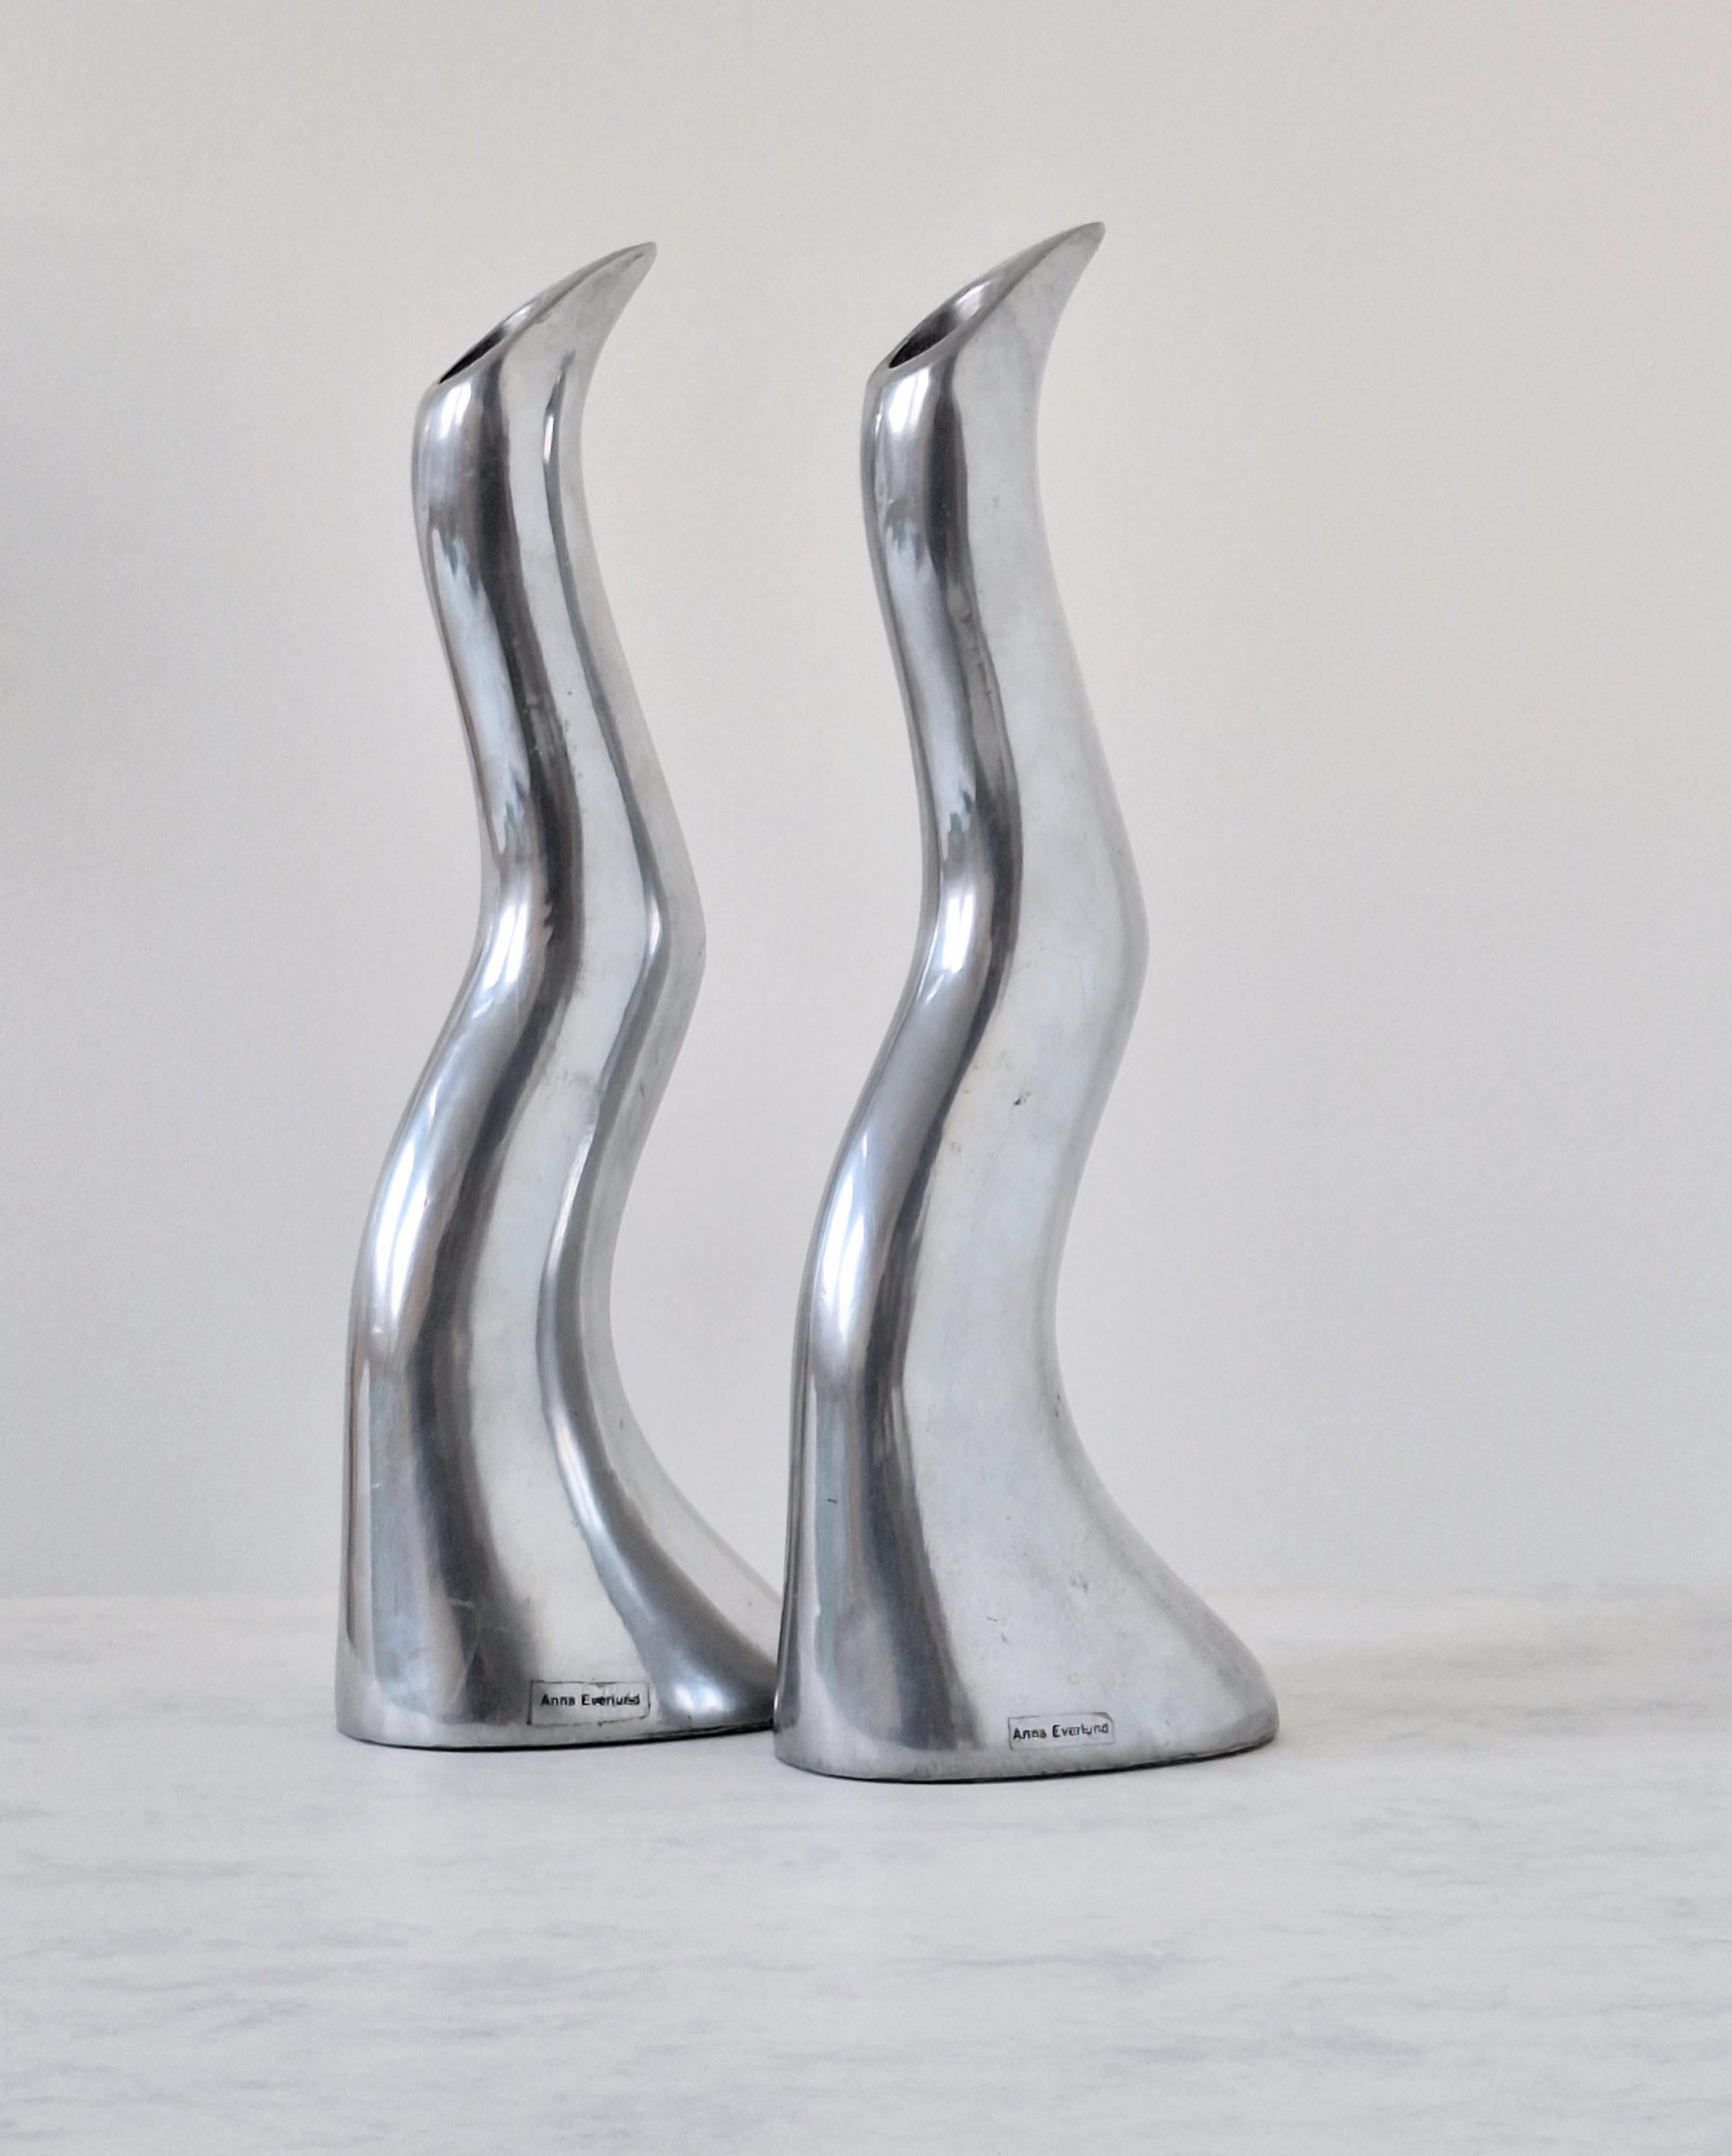 Anna Everlund Modernist Aluminium Candlesticks In Good Condition For Sale In London, GB